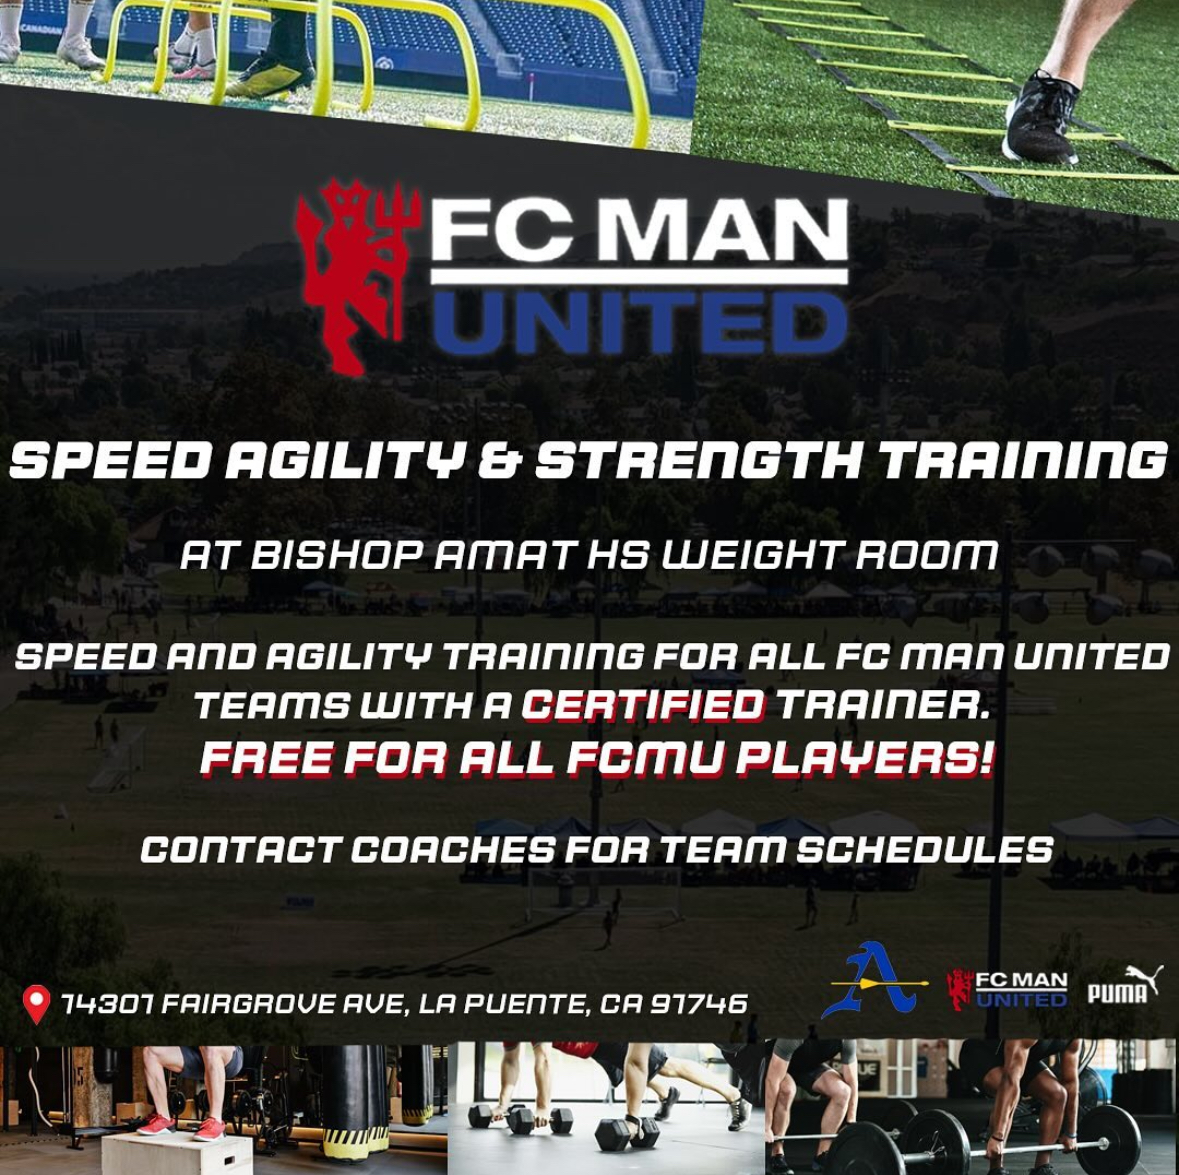 Speed Strength and Agility sessions FREE for all FC Man United Players!